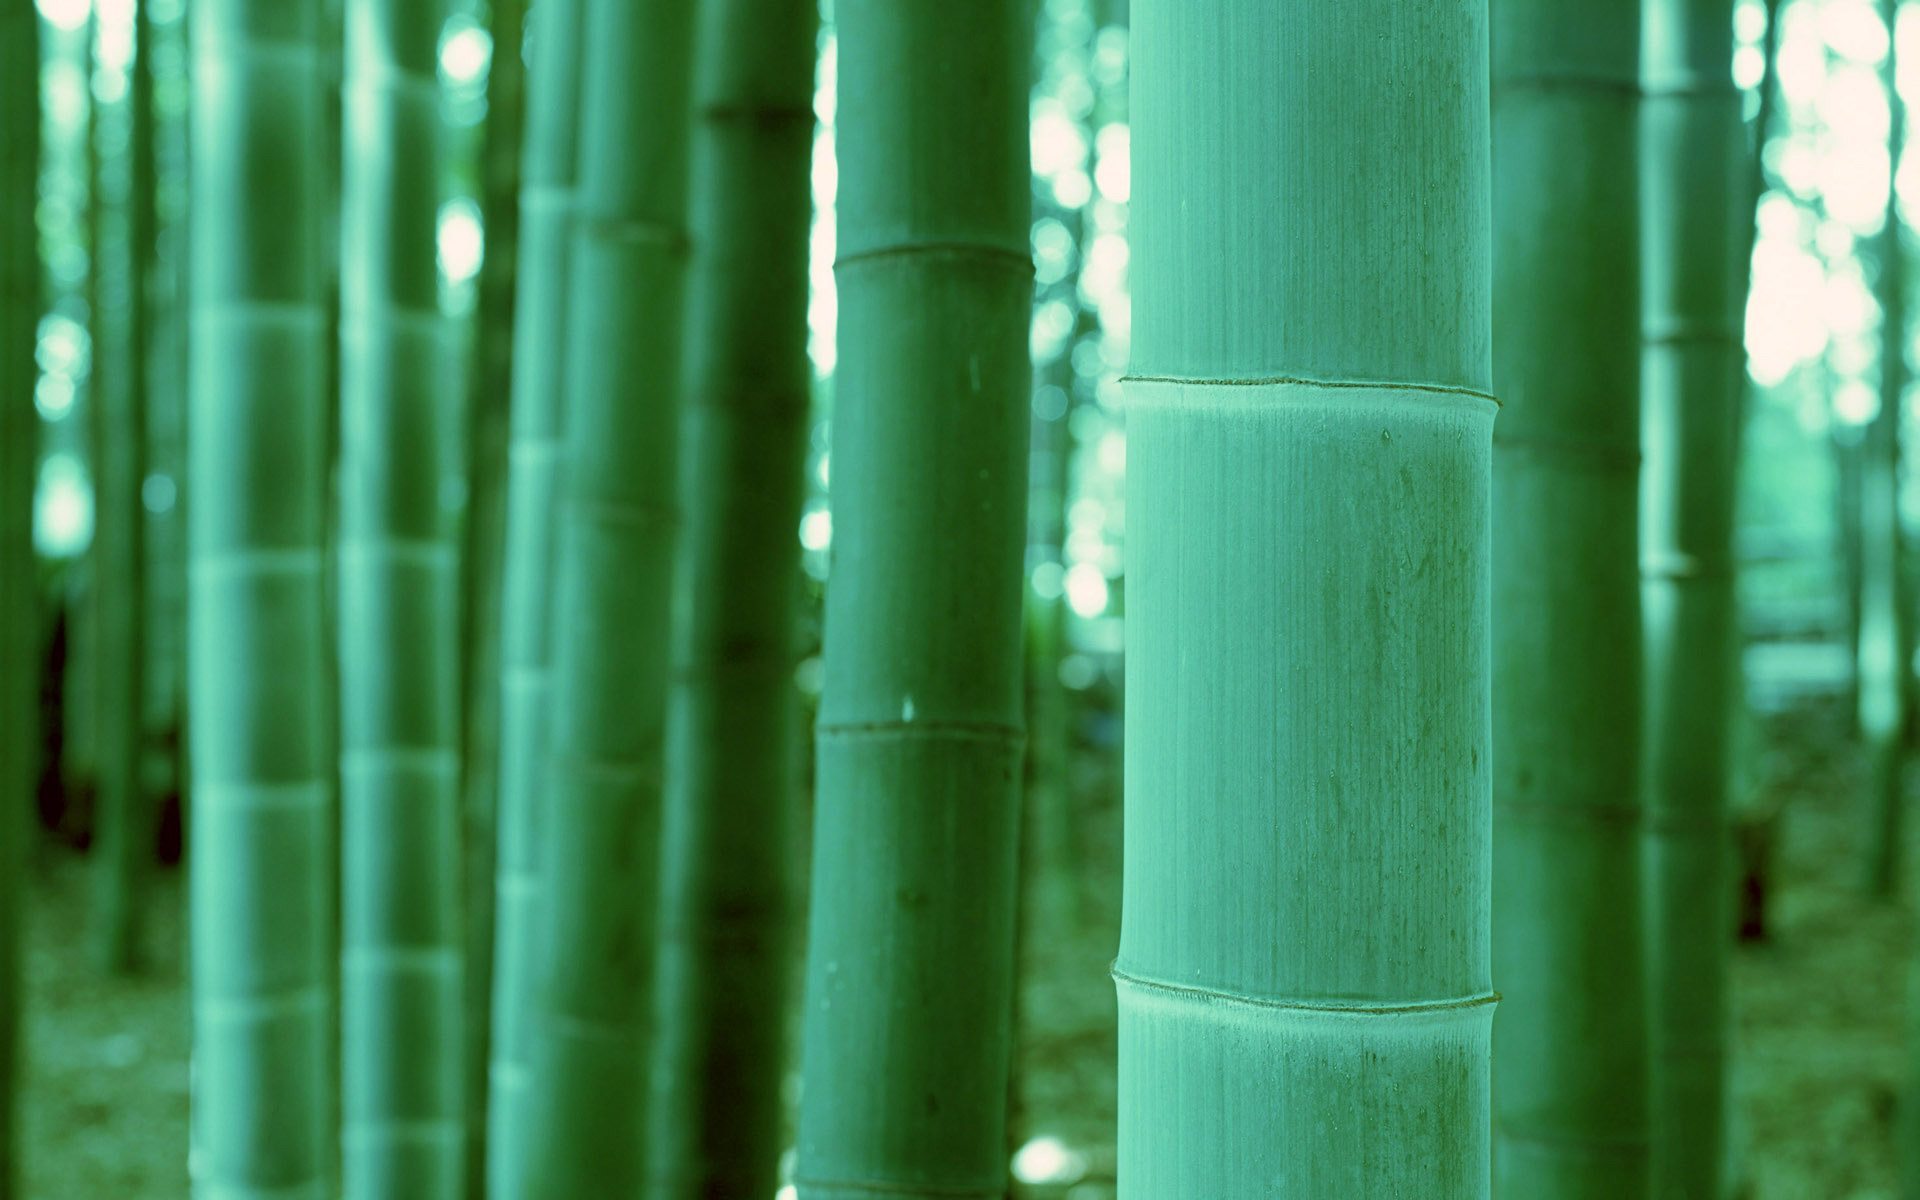 Green Bamboo Wallpaper Is A Great For Your Puter Desktop